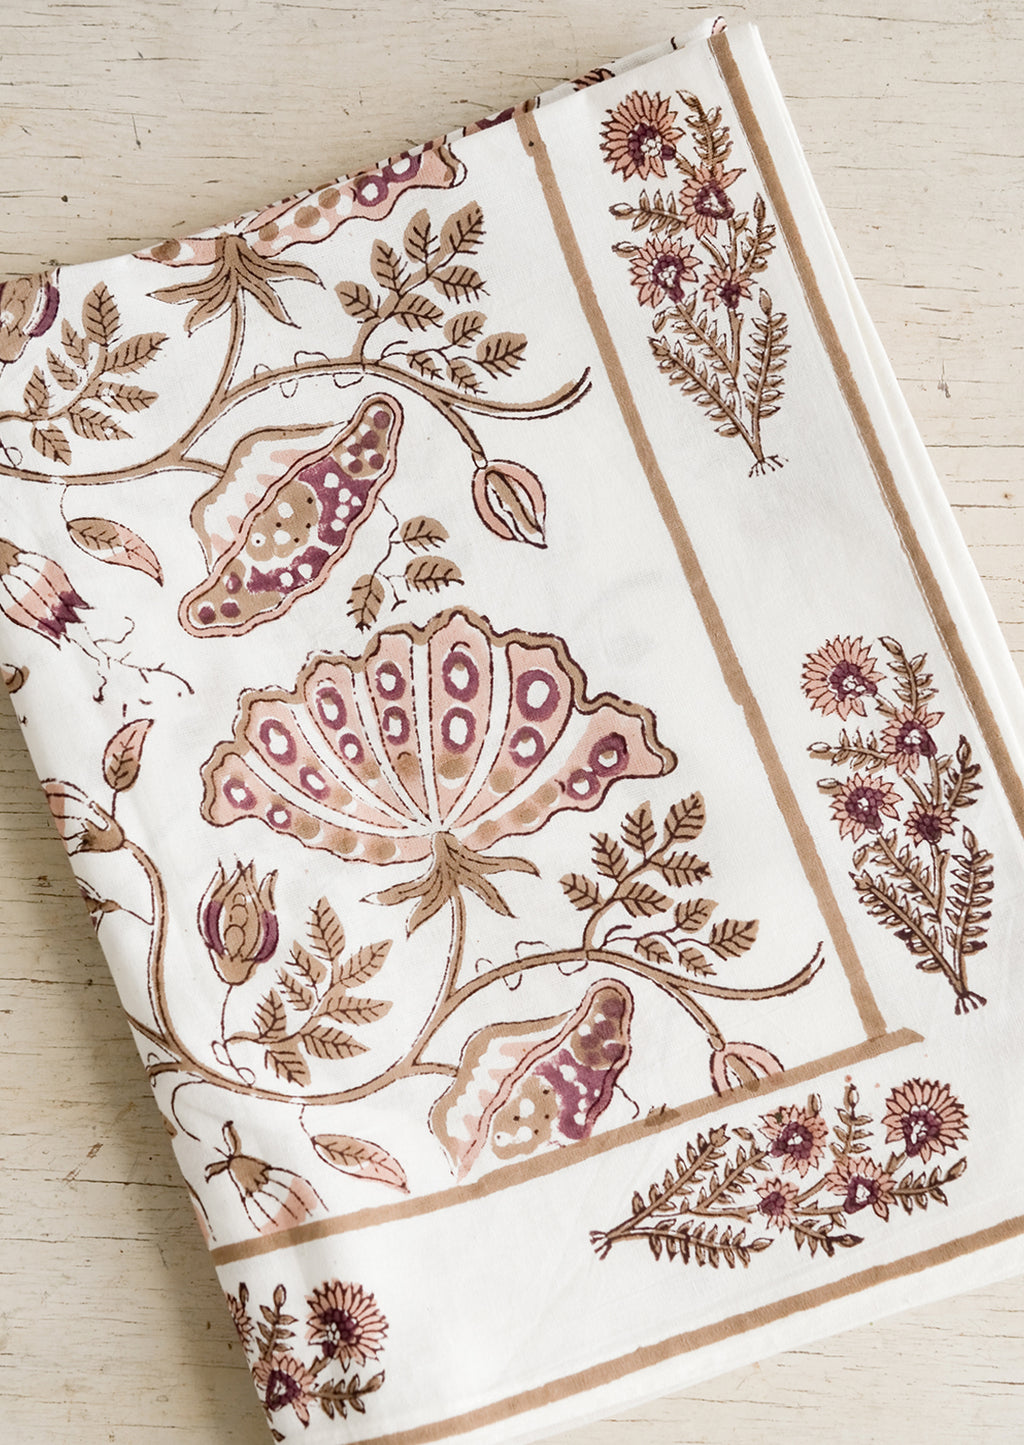 Rose Multi: A botanical block printed tablecloth in brown, pink and wine.